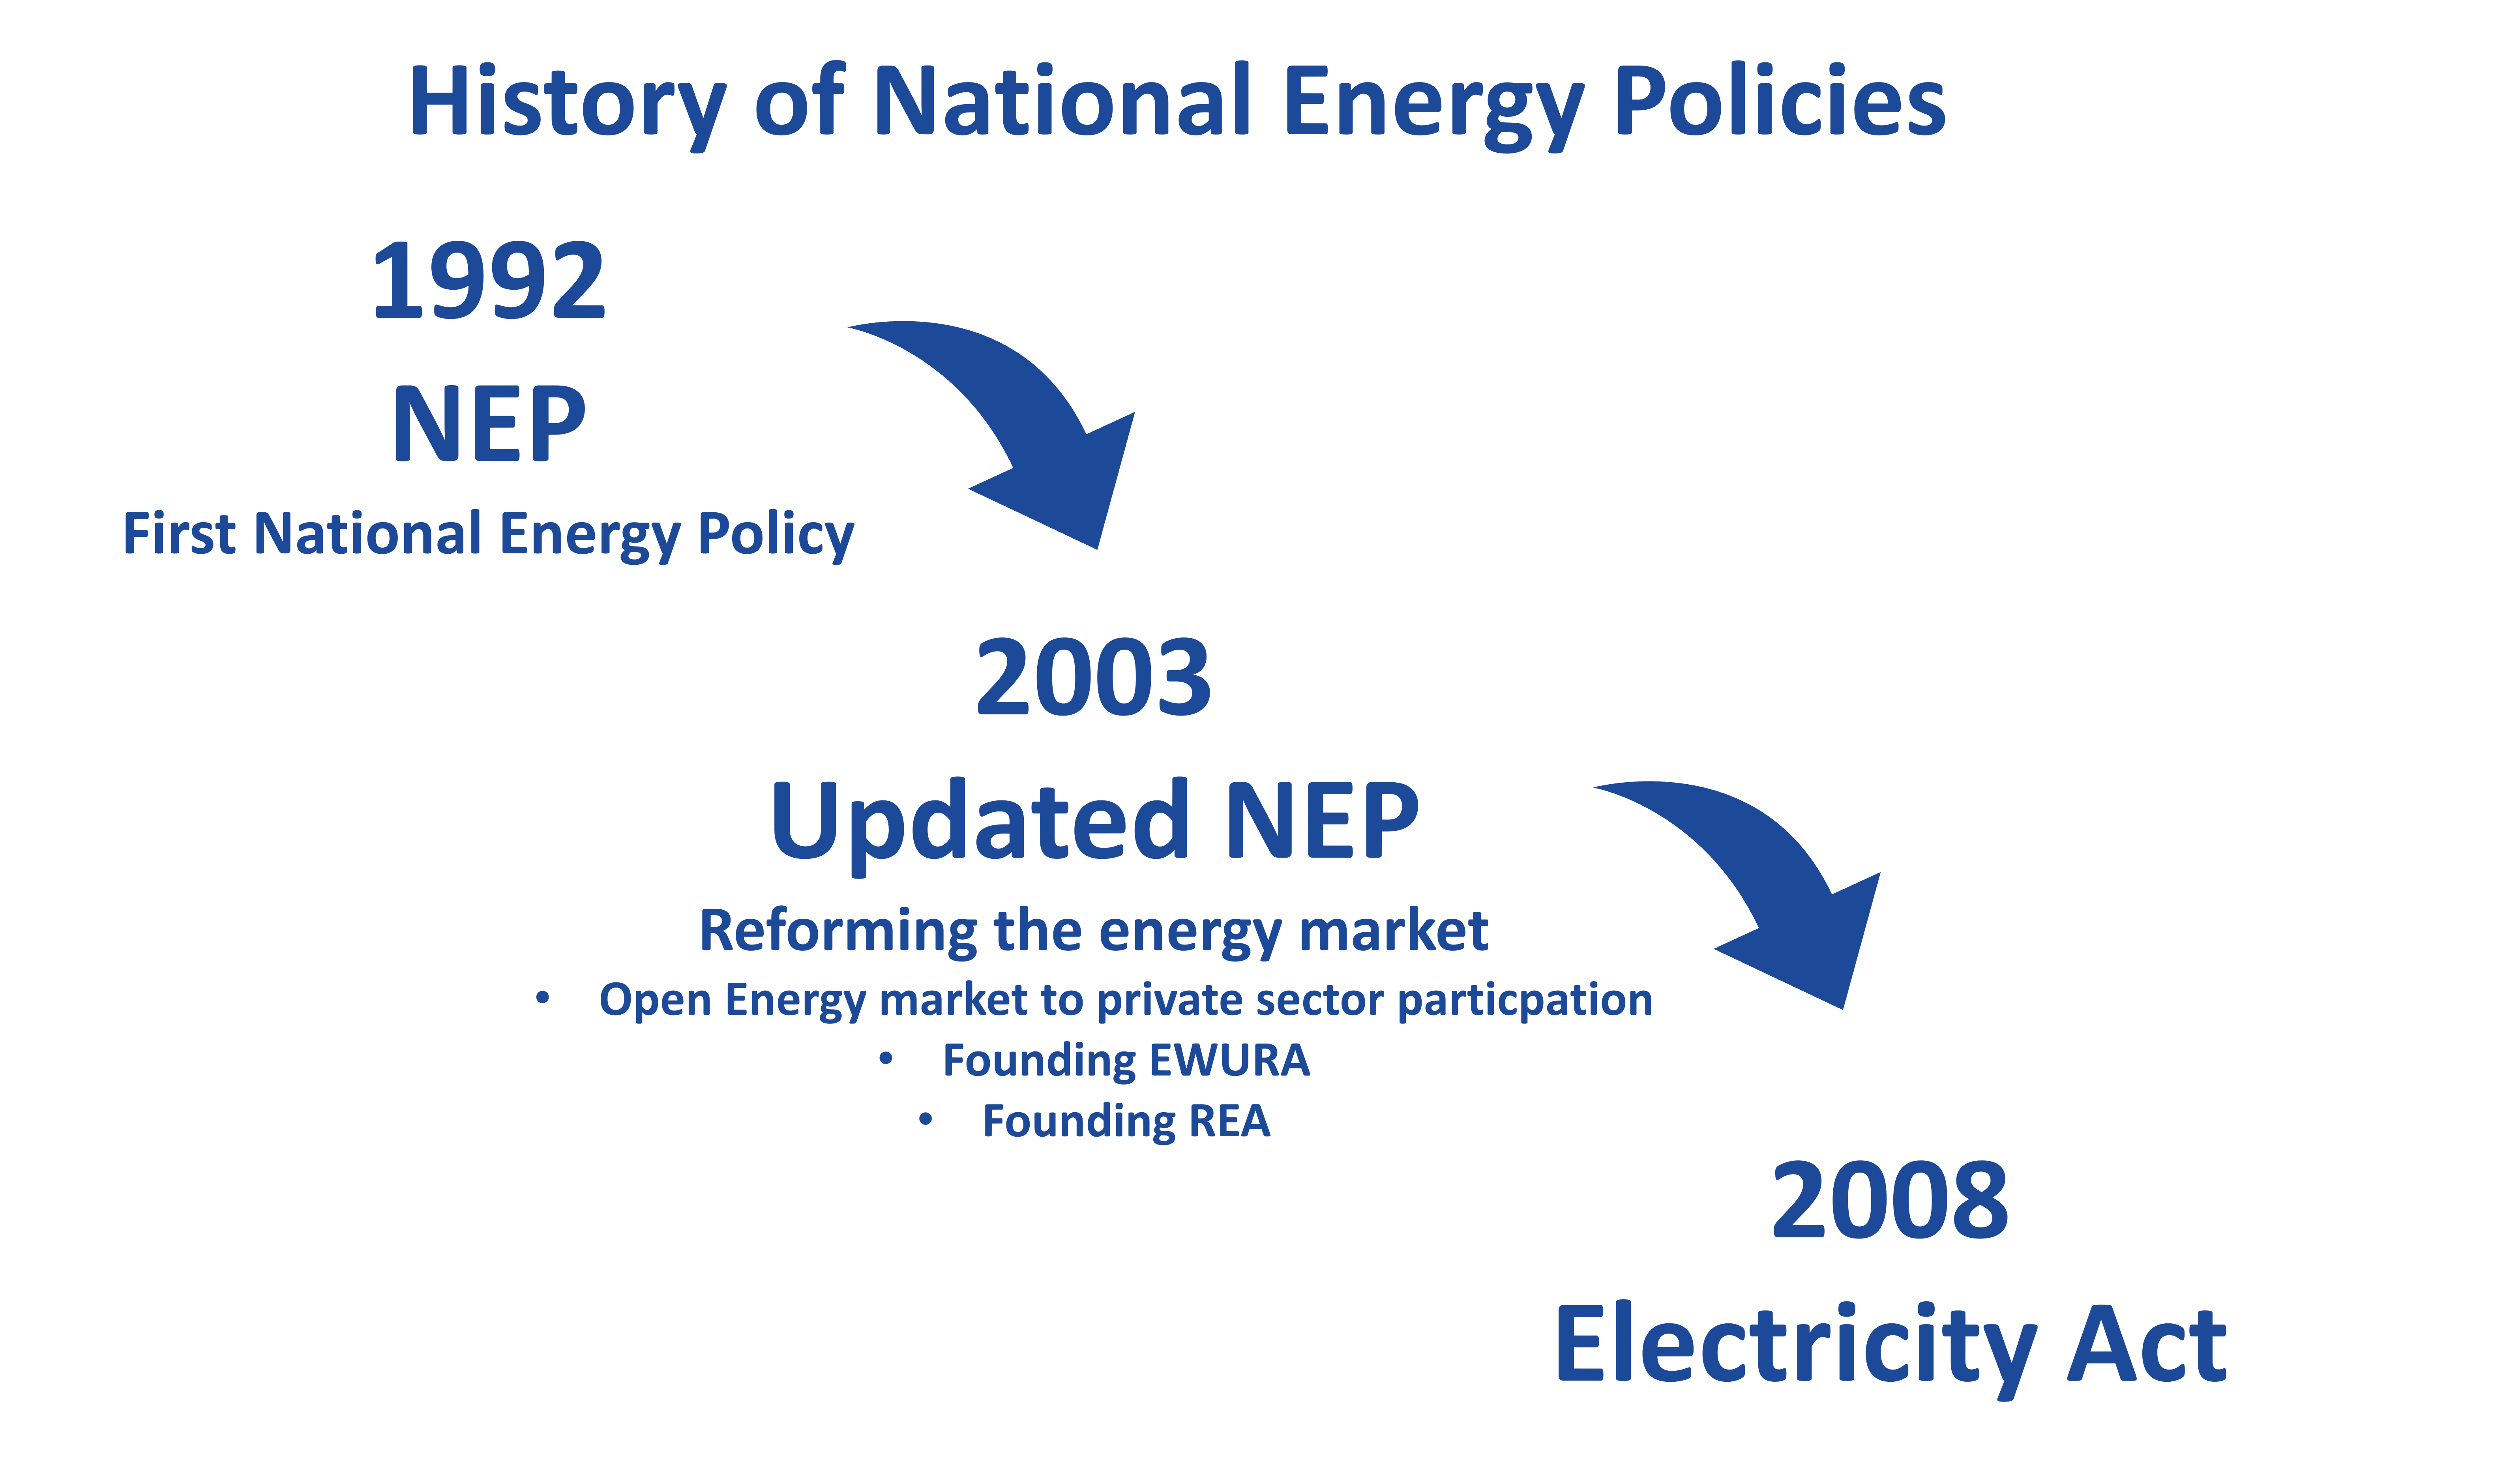 A Brief History of Energy in Tanzania